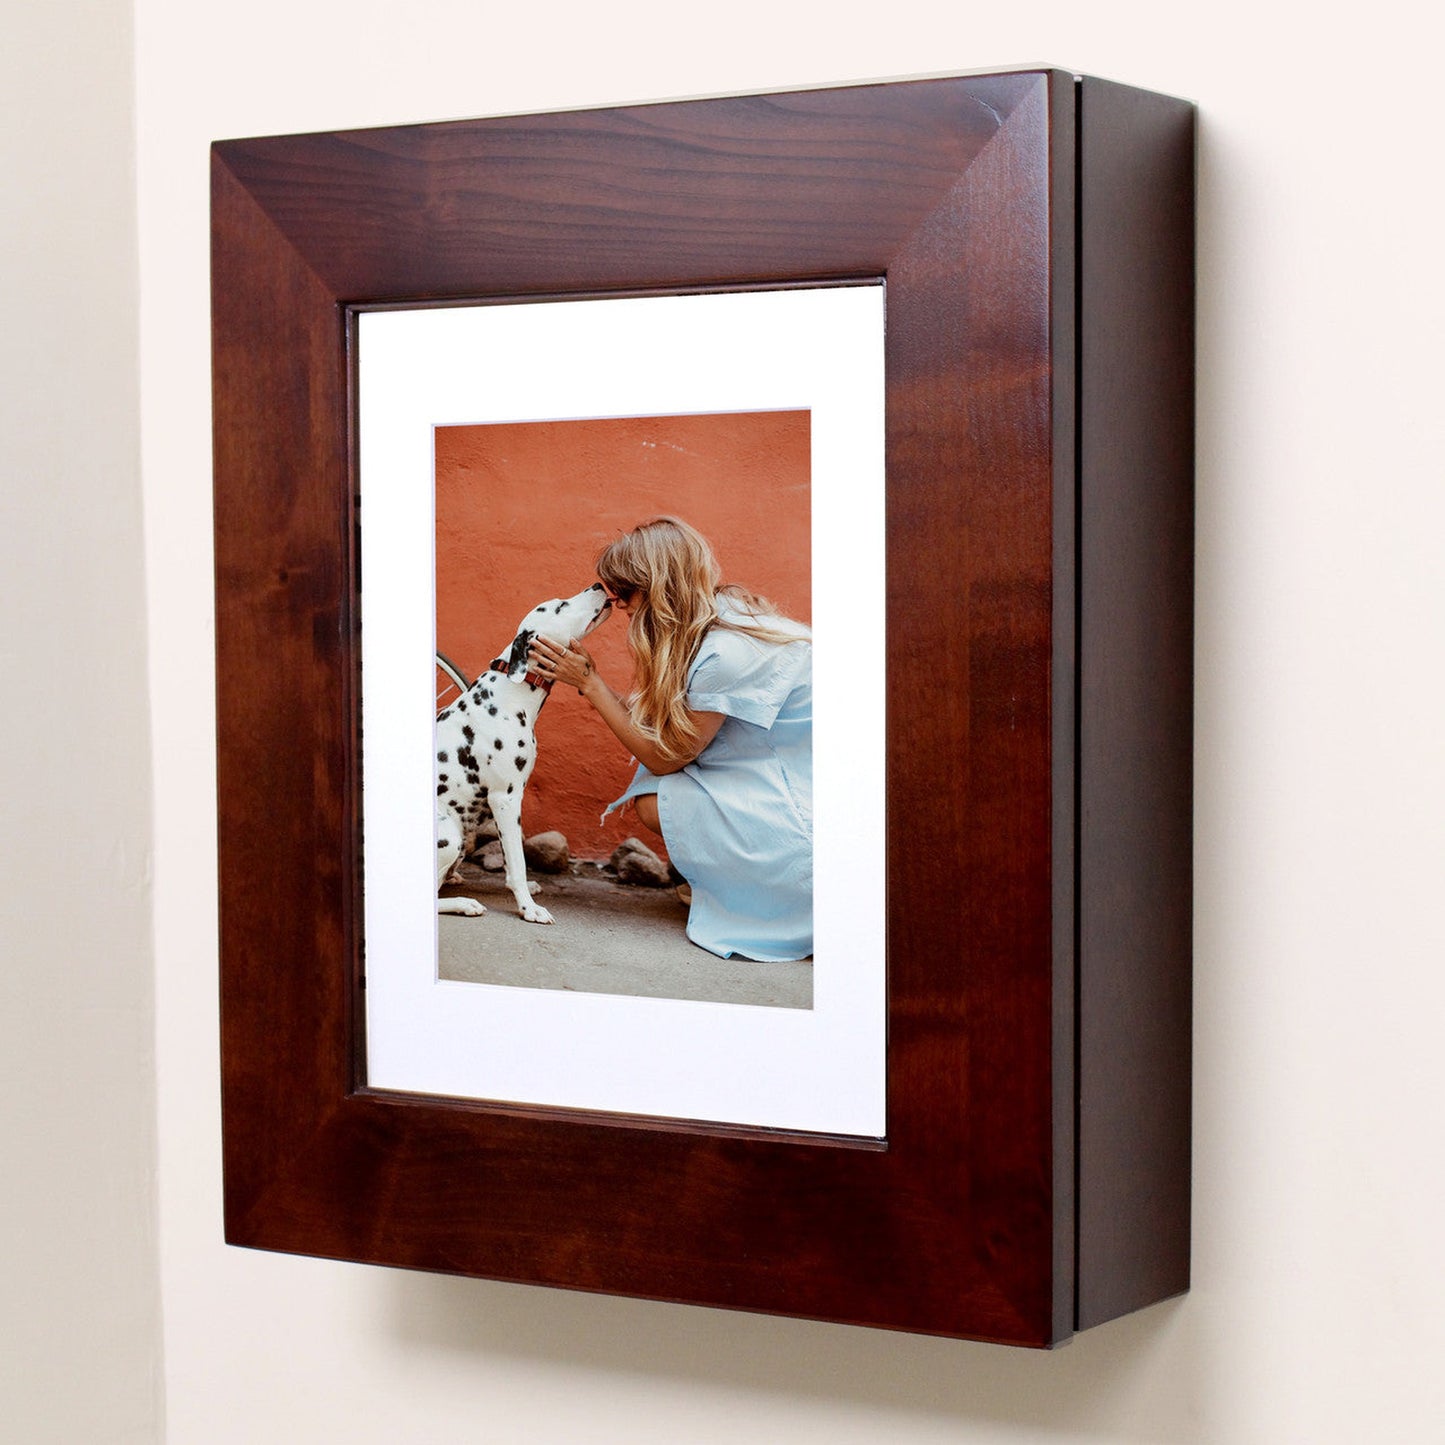 Fox Hollow Furnishings 20" x 17" Espresso Wall Mount Picture Frame Medicine Cabinet With Mirror and White 8" x 10" Matting